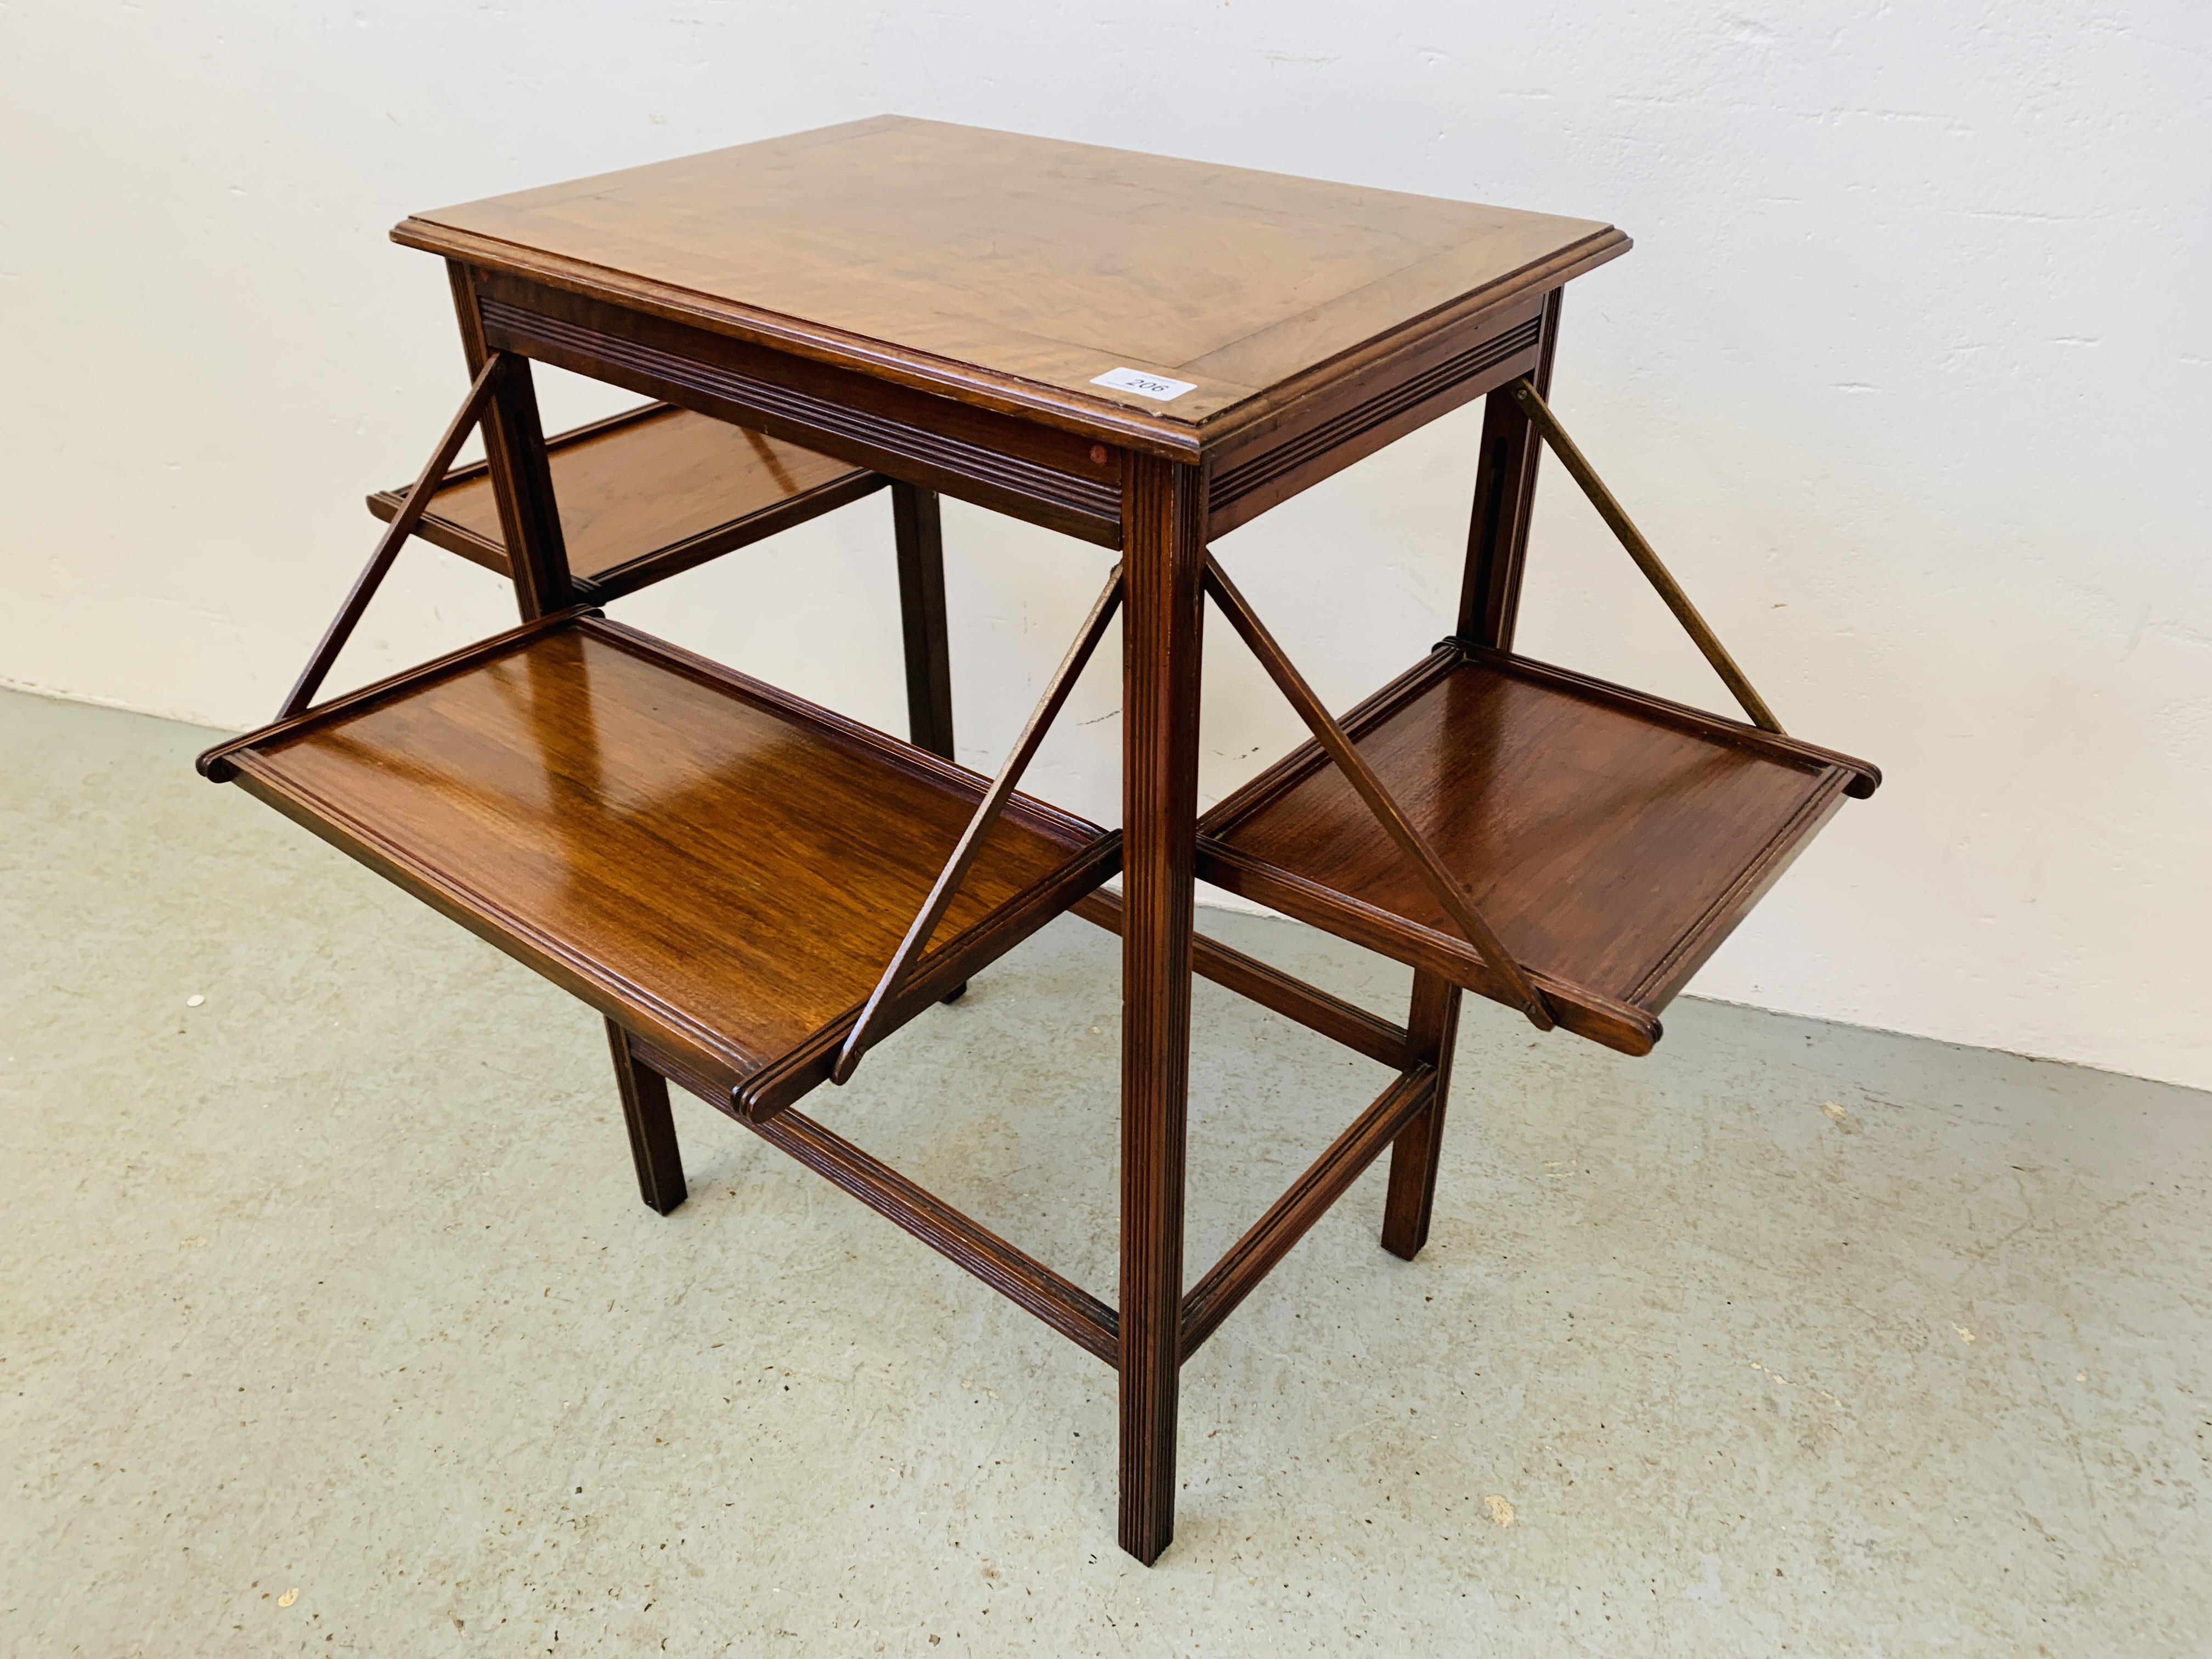 EDWARDIAN MAHOGANY OCCASIONAL TABLE WITH CANTILEVER TRAYS. - Image 4 of 5